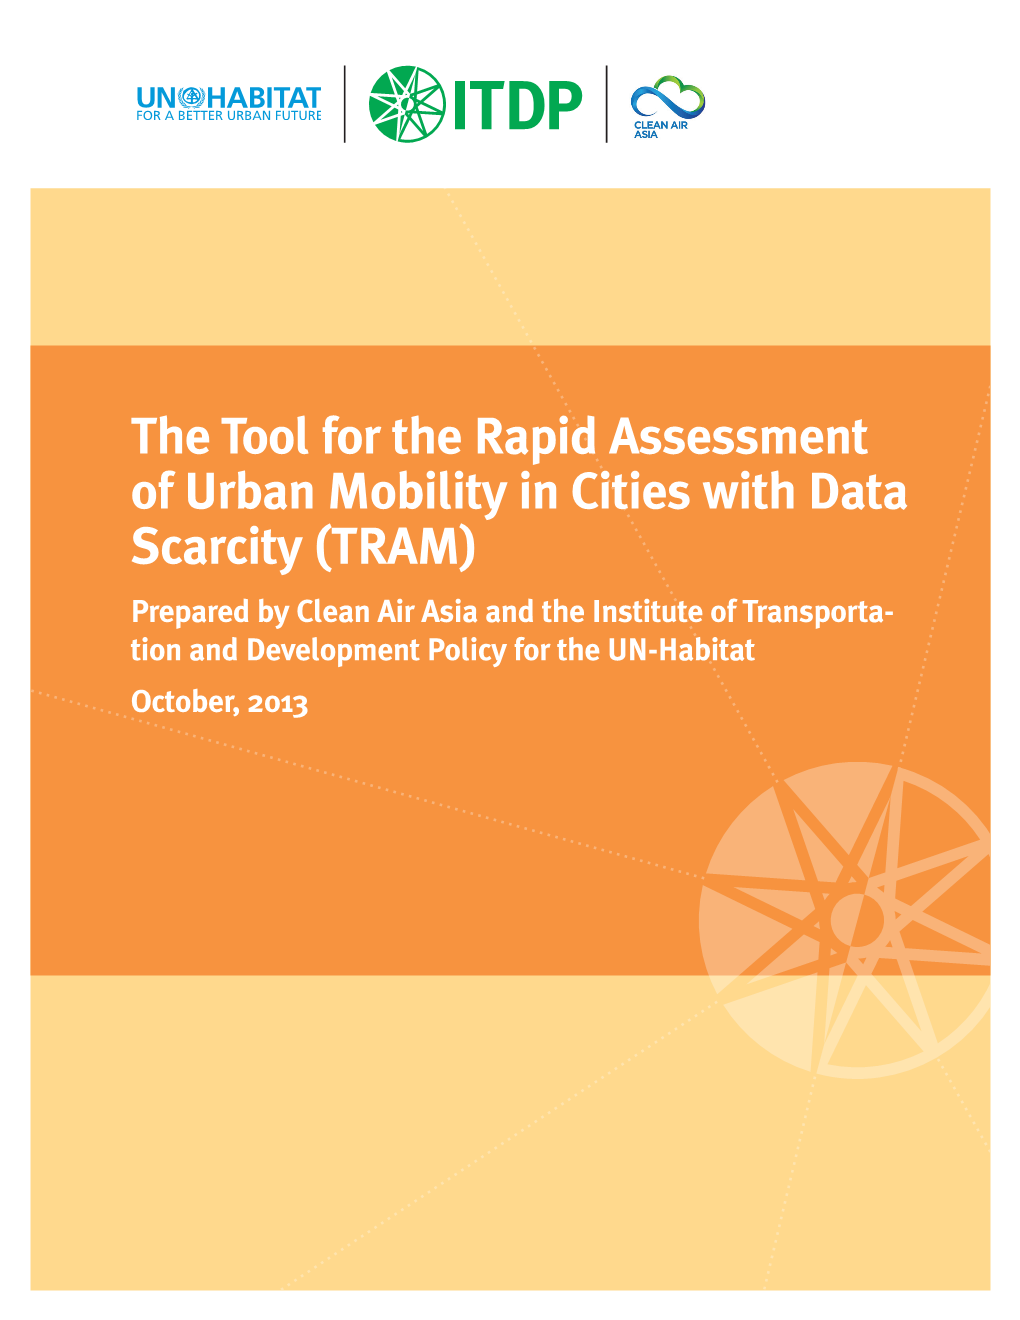 The Tool for the Rapid Assessment of Urban Mobility in Cities with Data